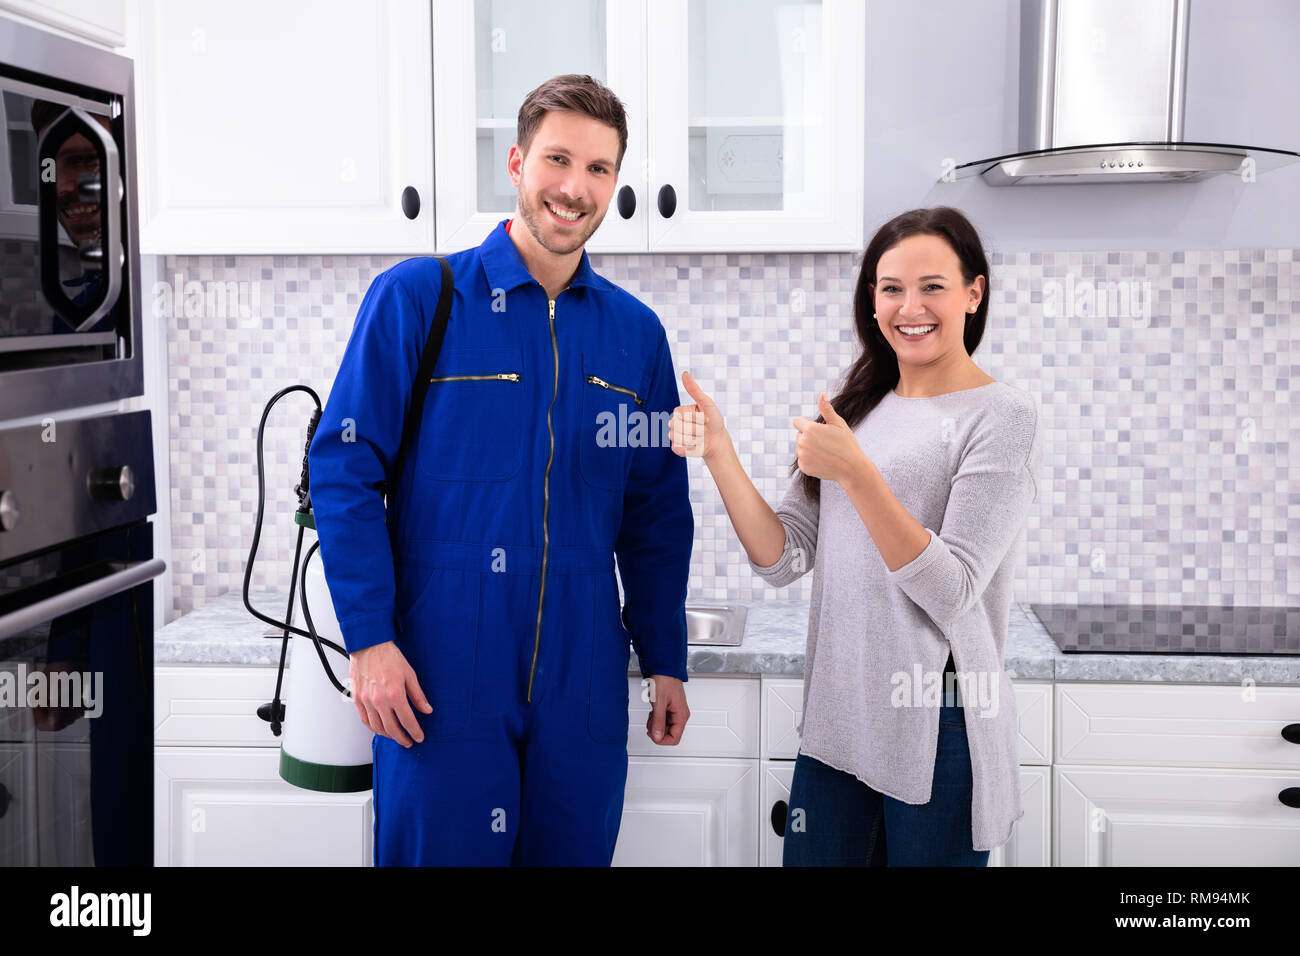 Woman Showing Thumbs Up With Pest Control Worker Standing In Kitchen Stock Photo